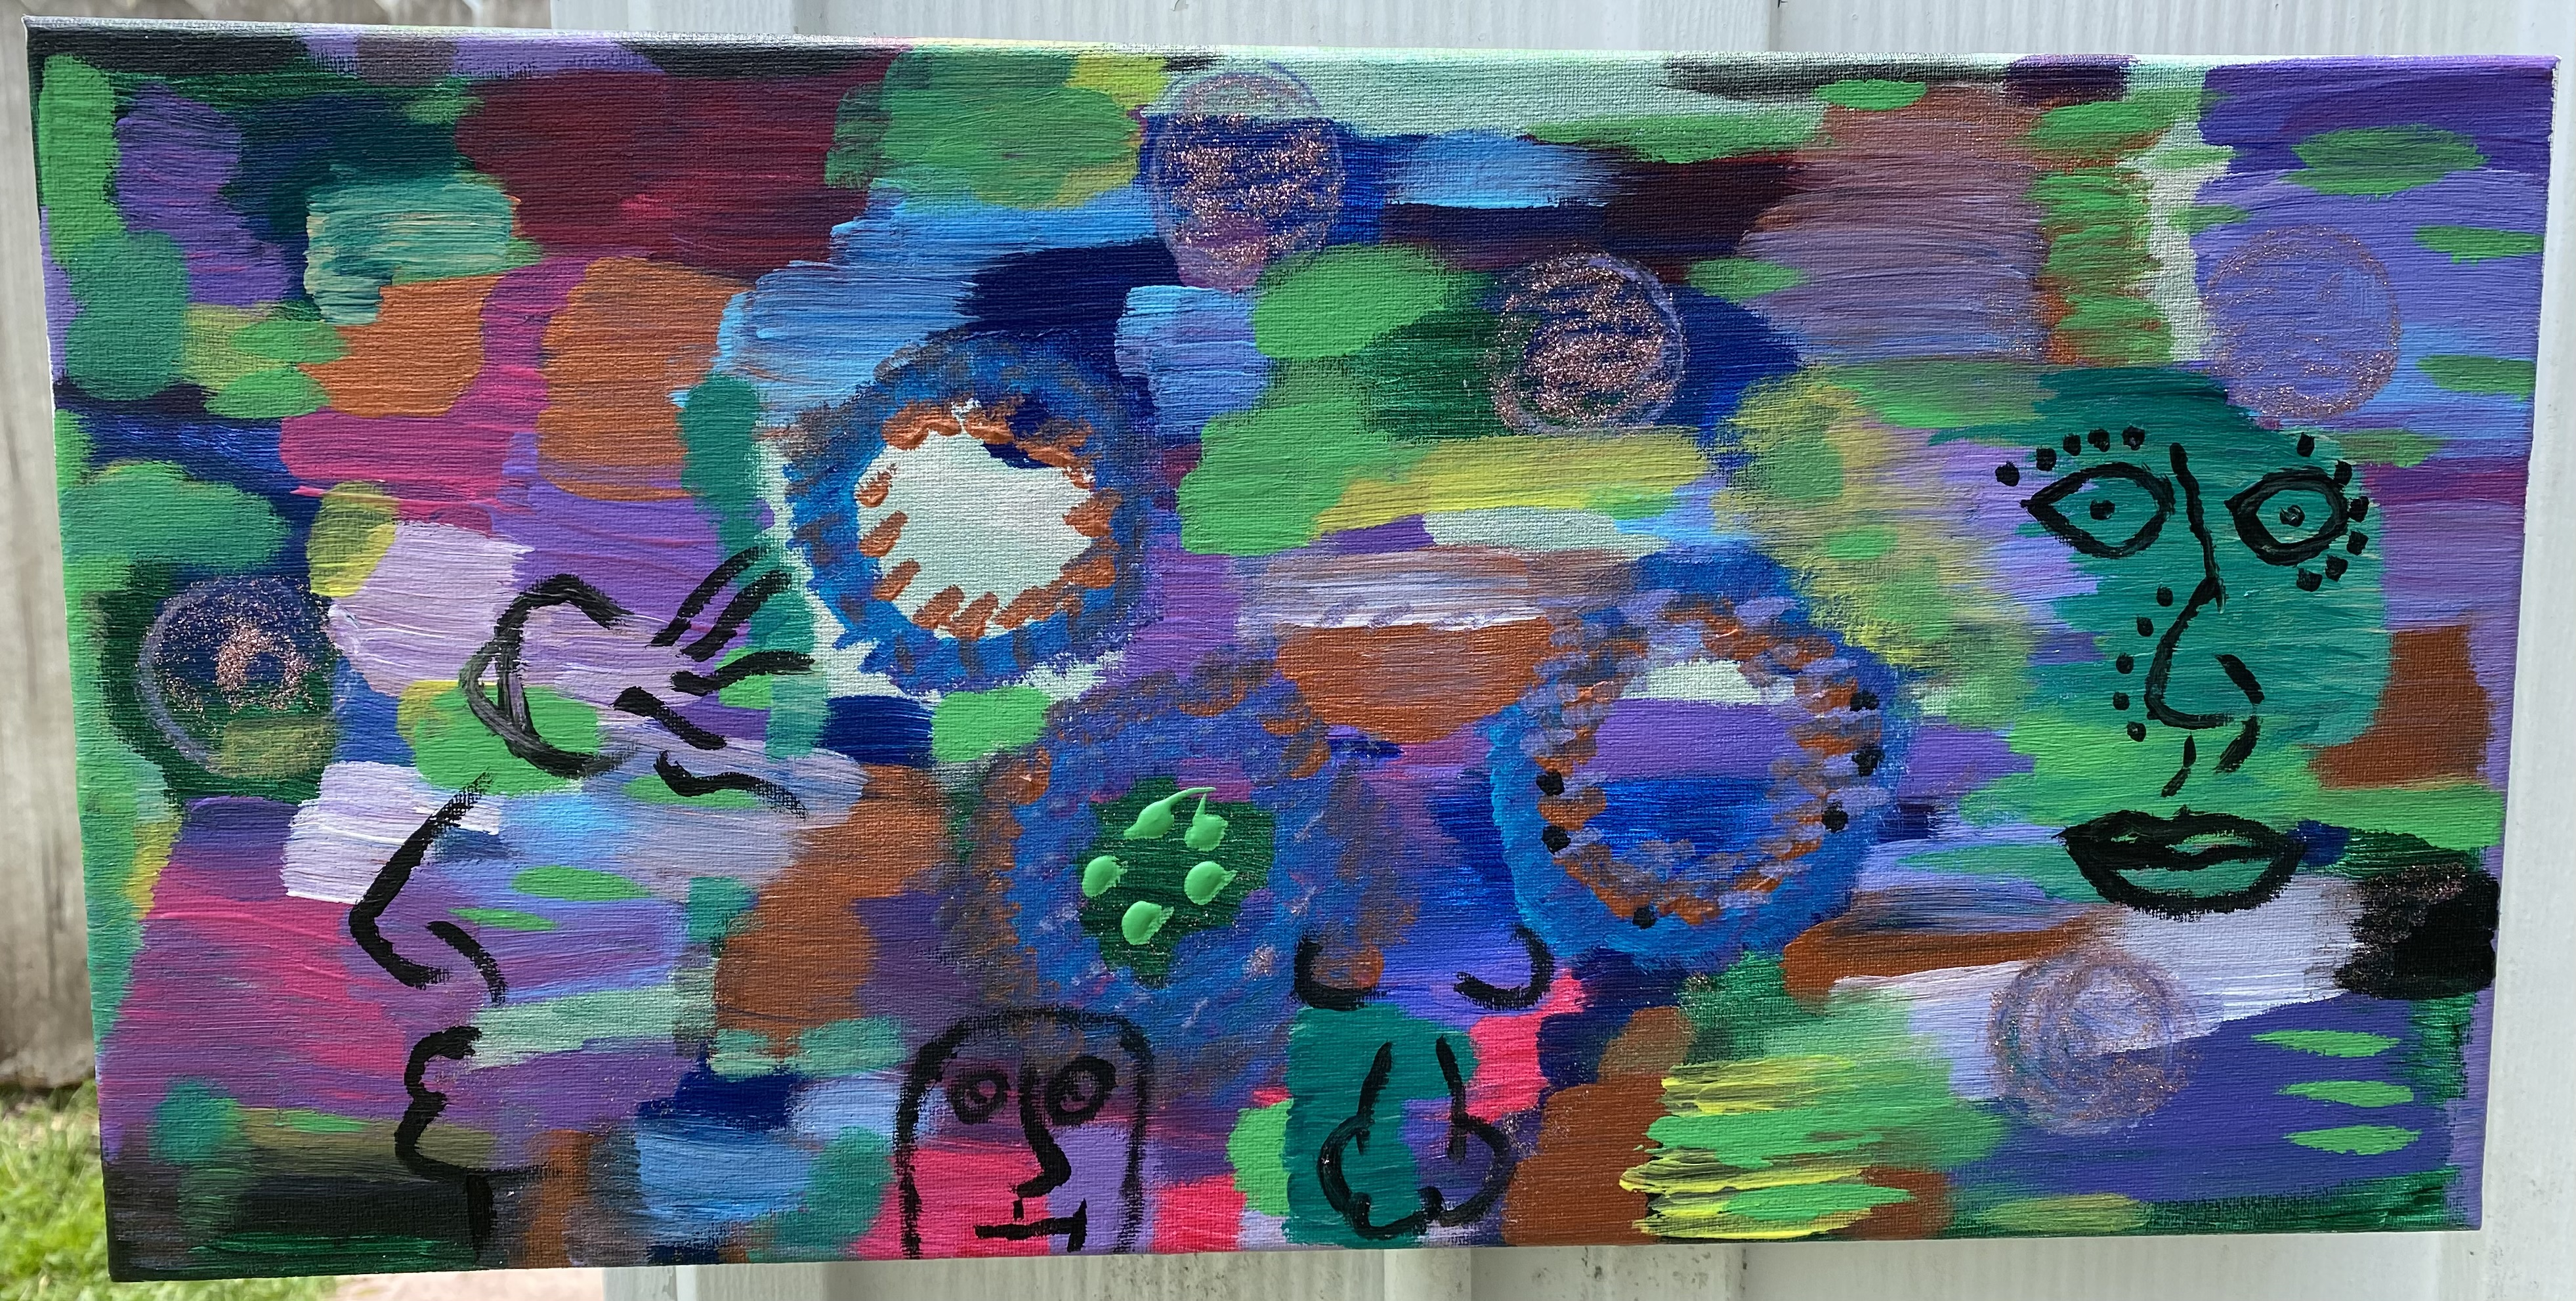 vibrant, colorful 10in x 20in canvas painting with four abstract faces and circles of glitter.